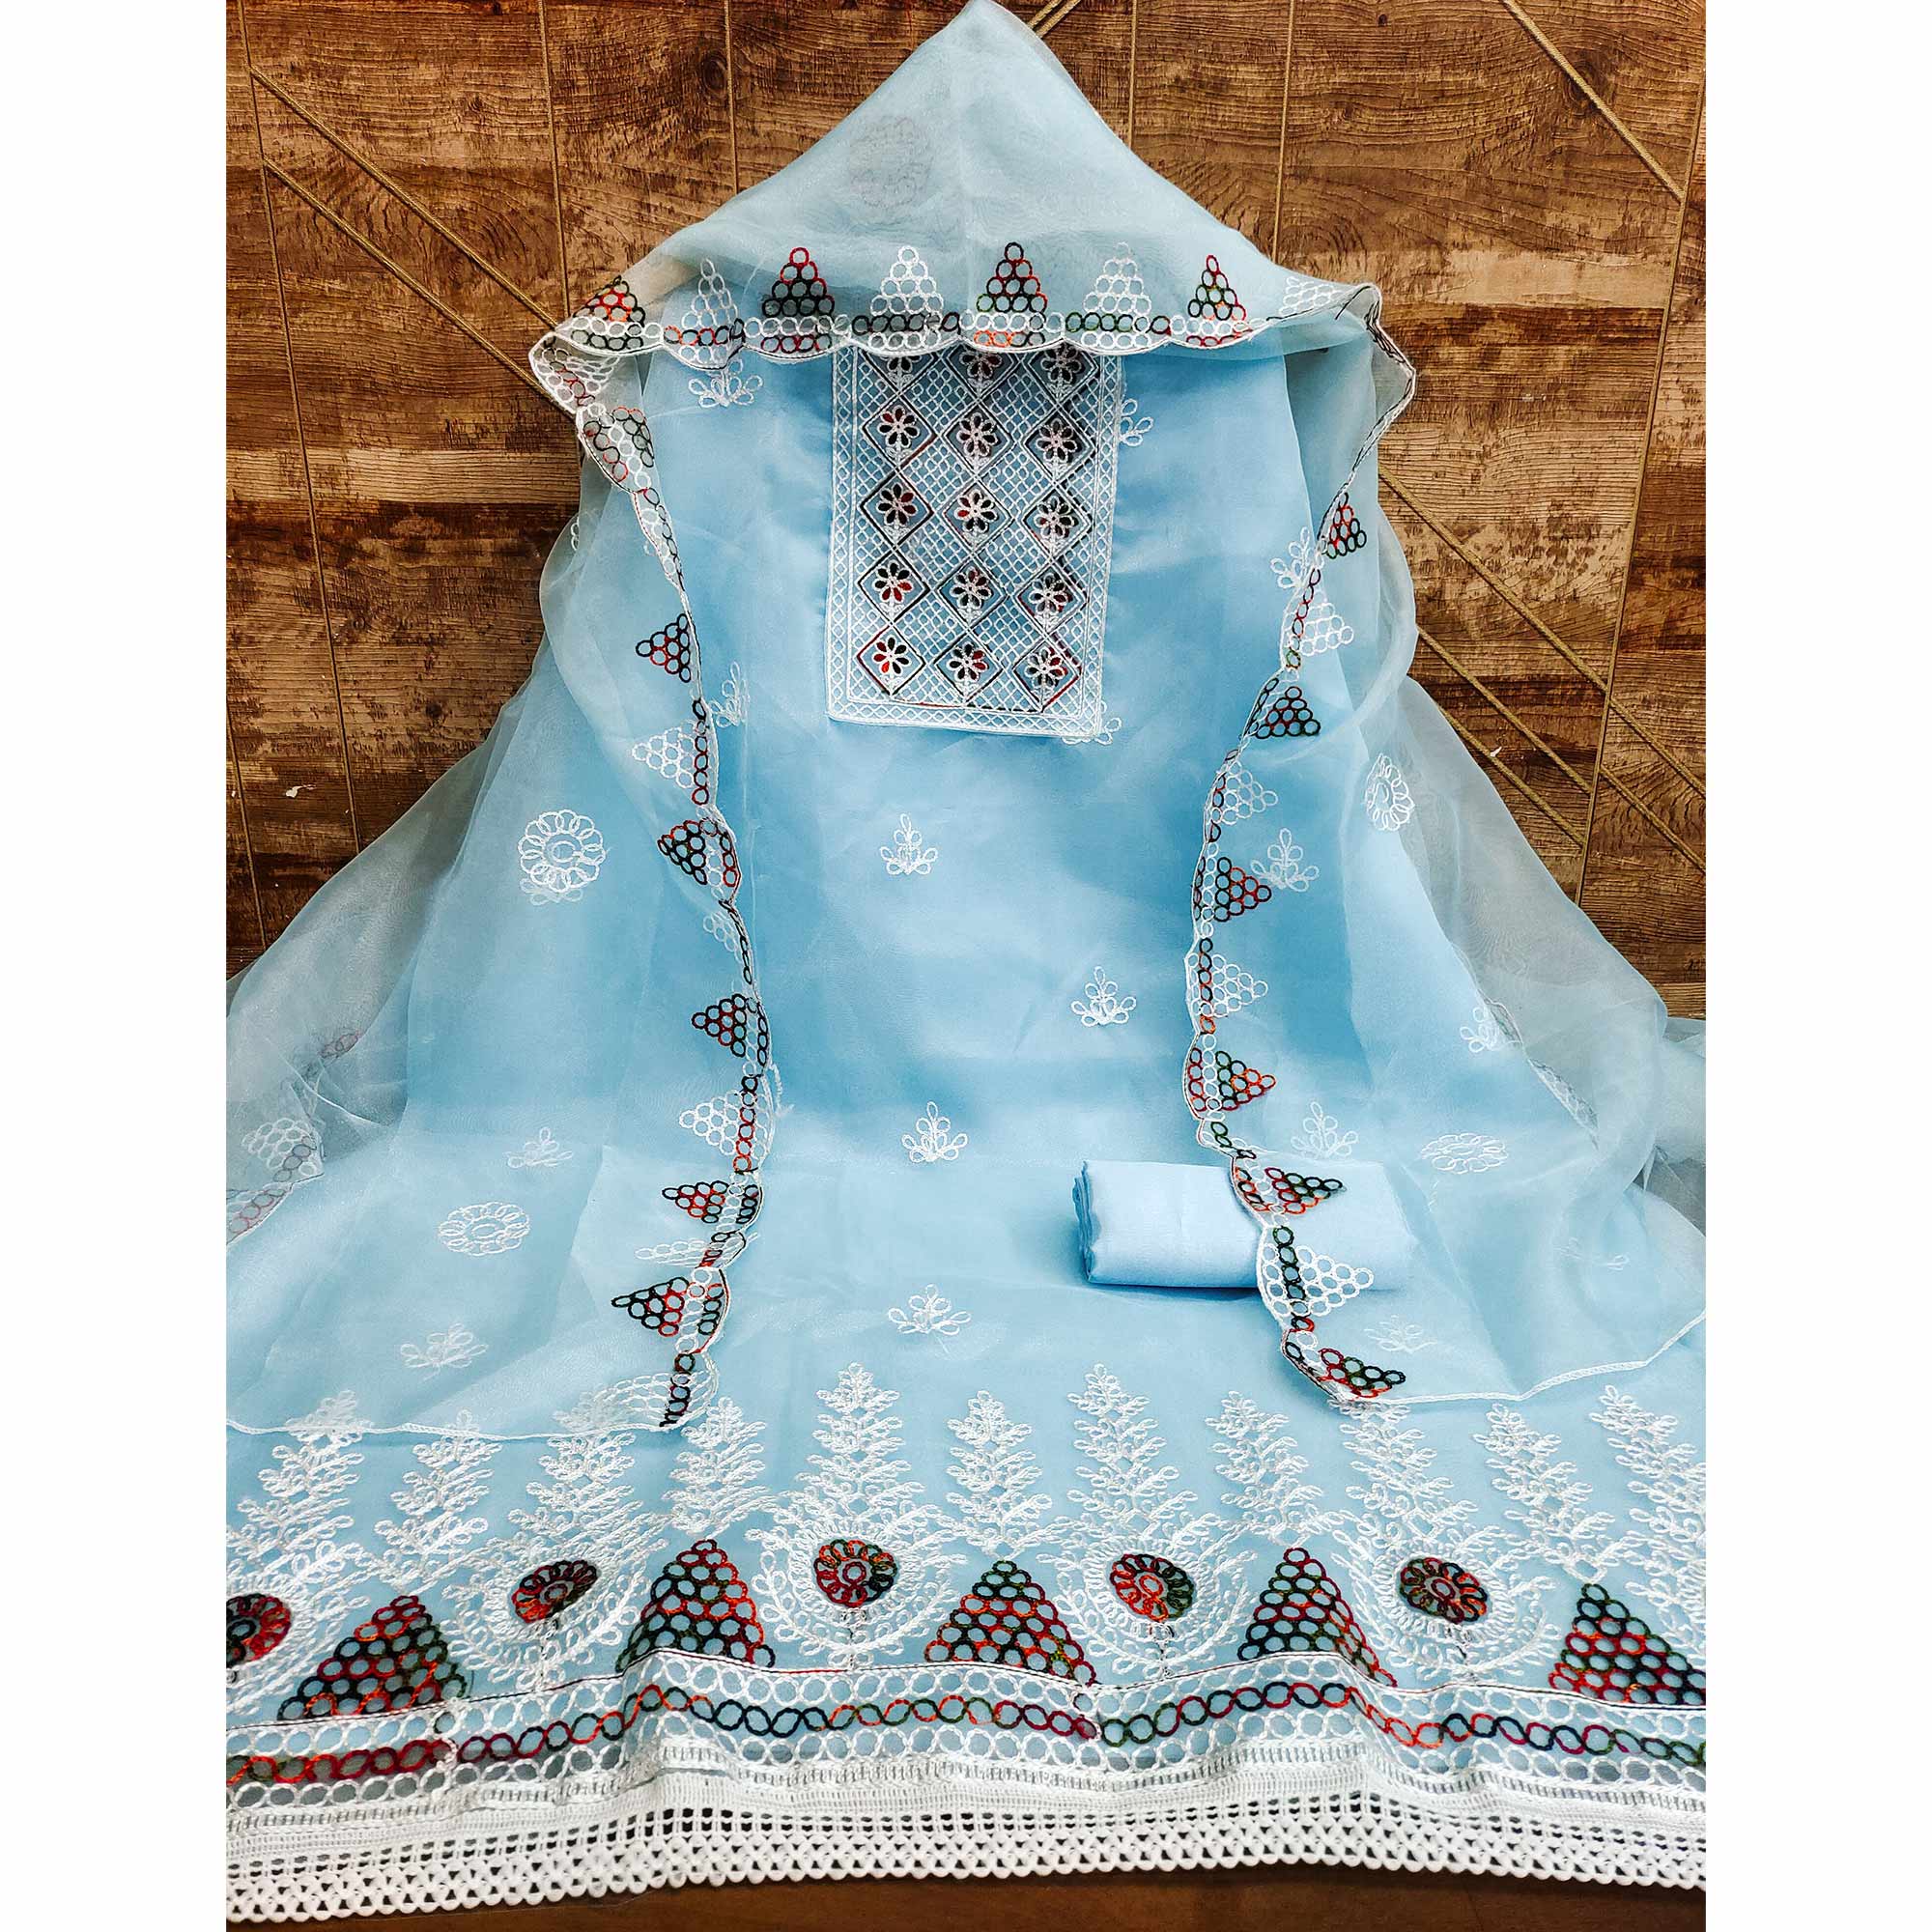 Sky Blue Floral Embroidered Organza Dress Material